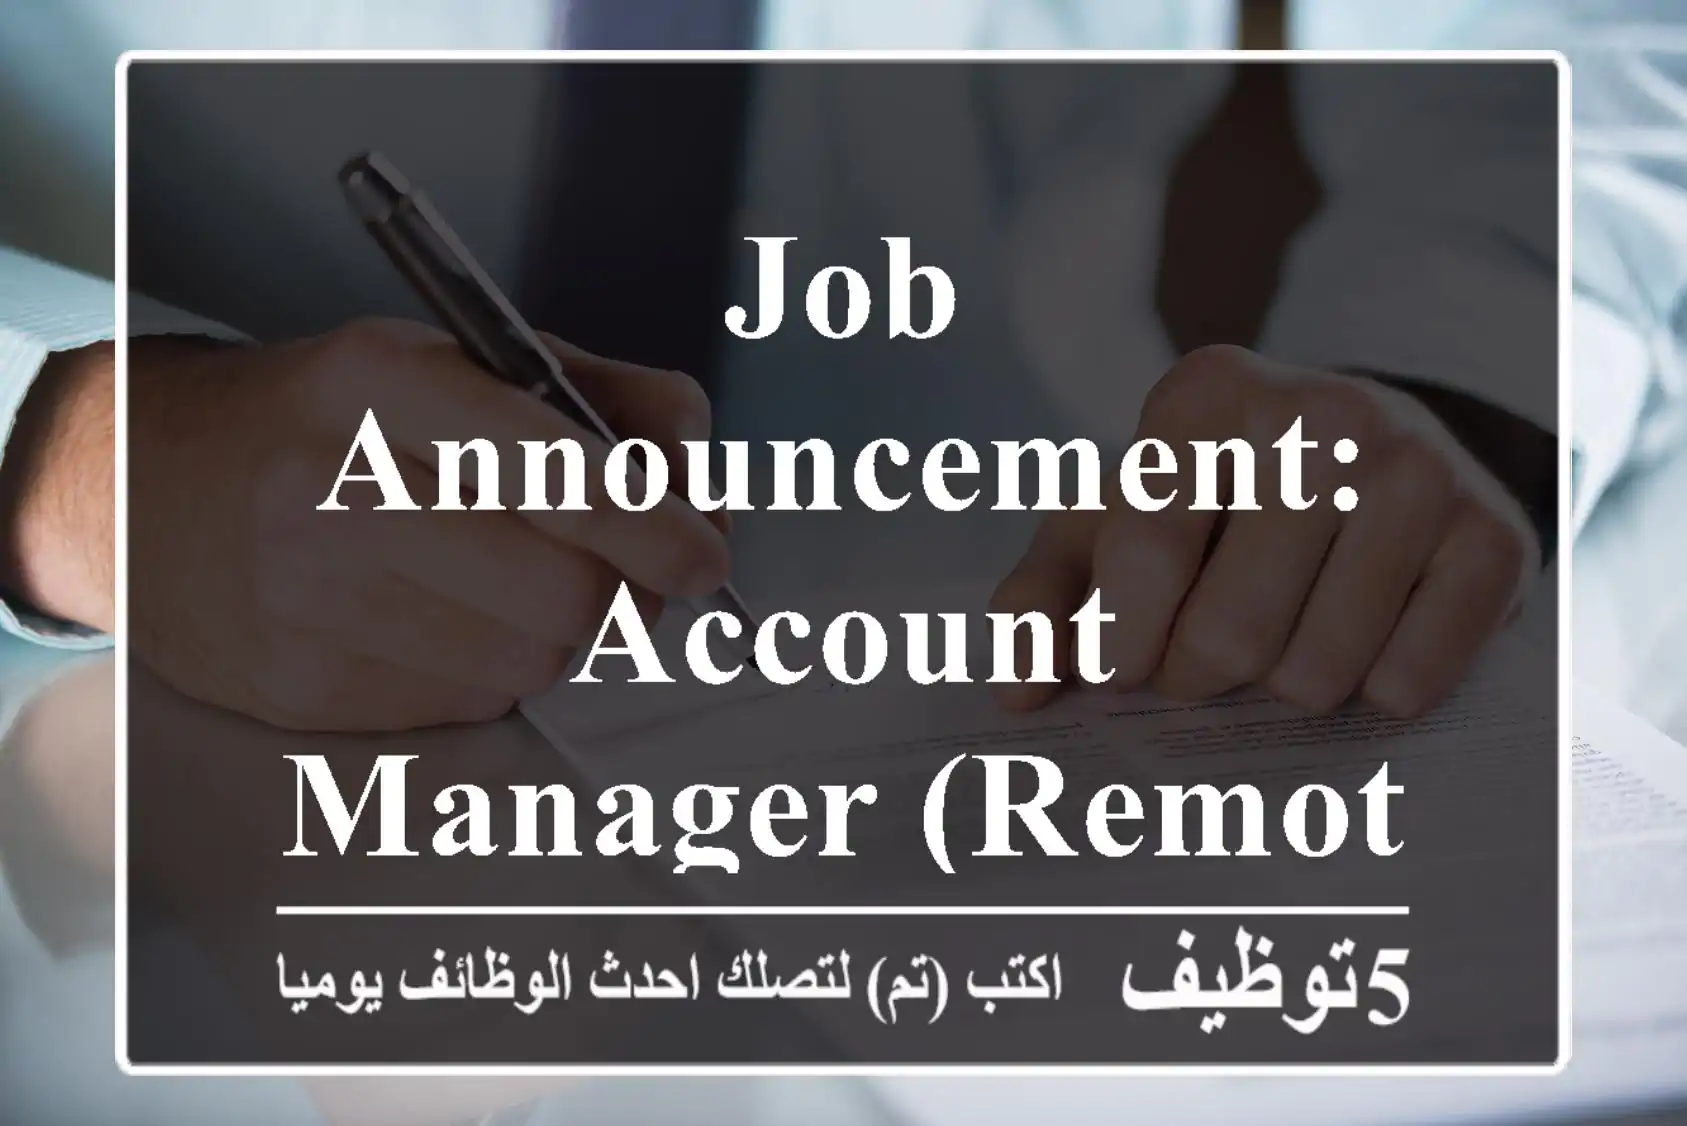 Job Announcement: Account Manager (Remote Work Opportunity)